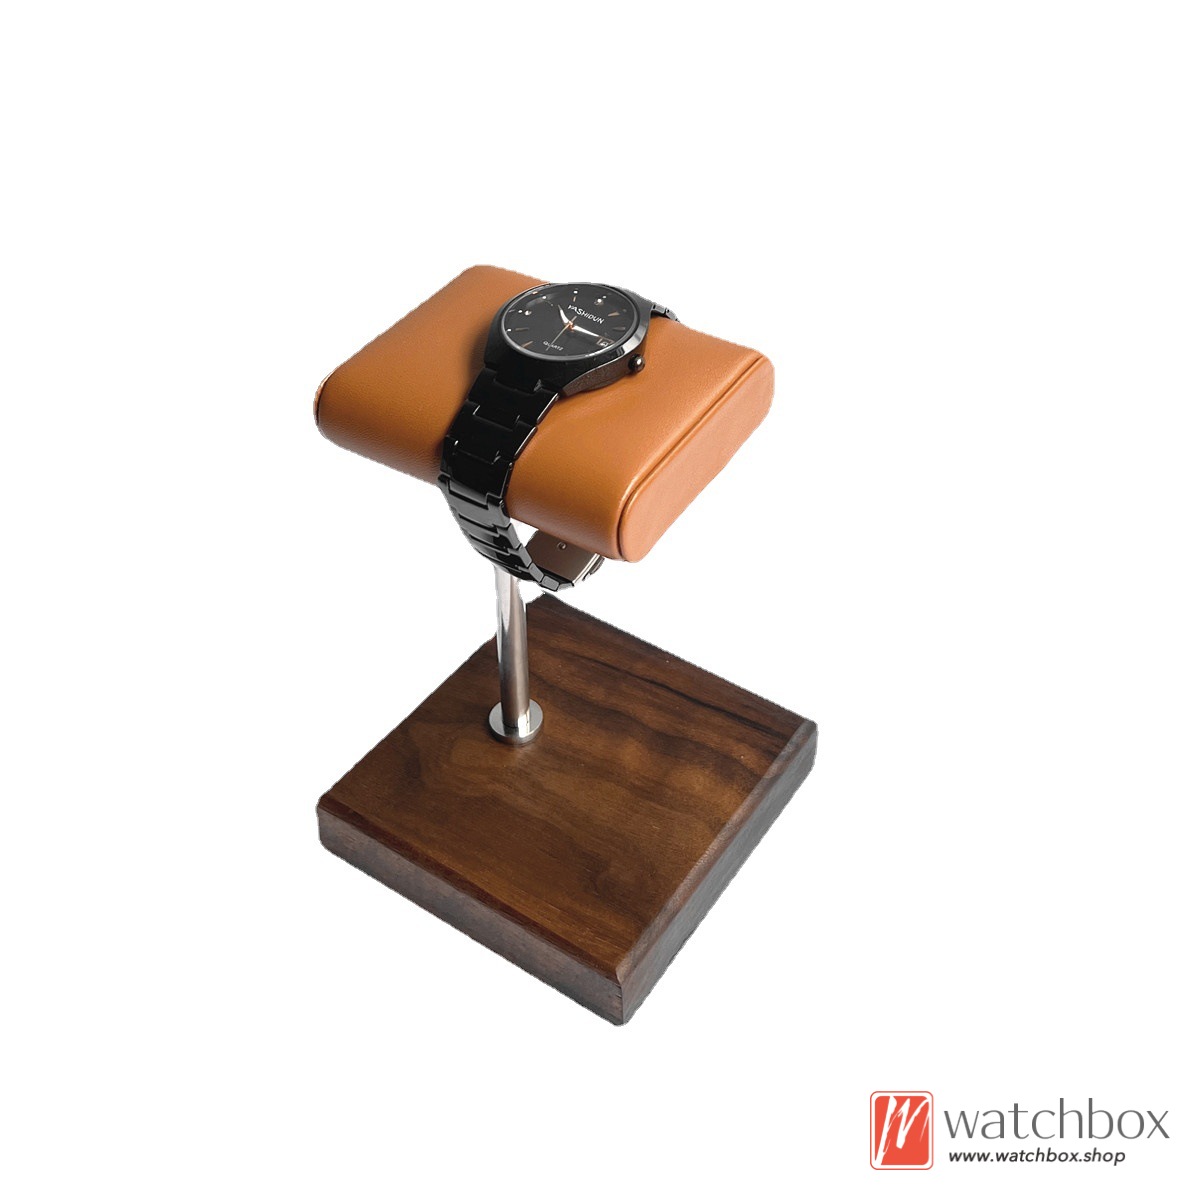 The Counter Walnut Wood Base PU Leather Watch Jewelry Case Display Stand Holder